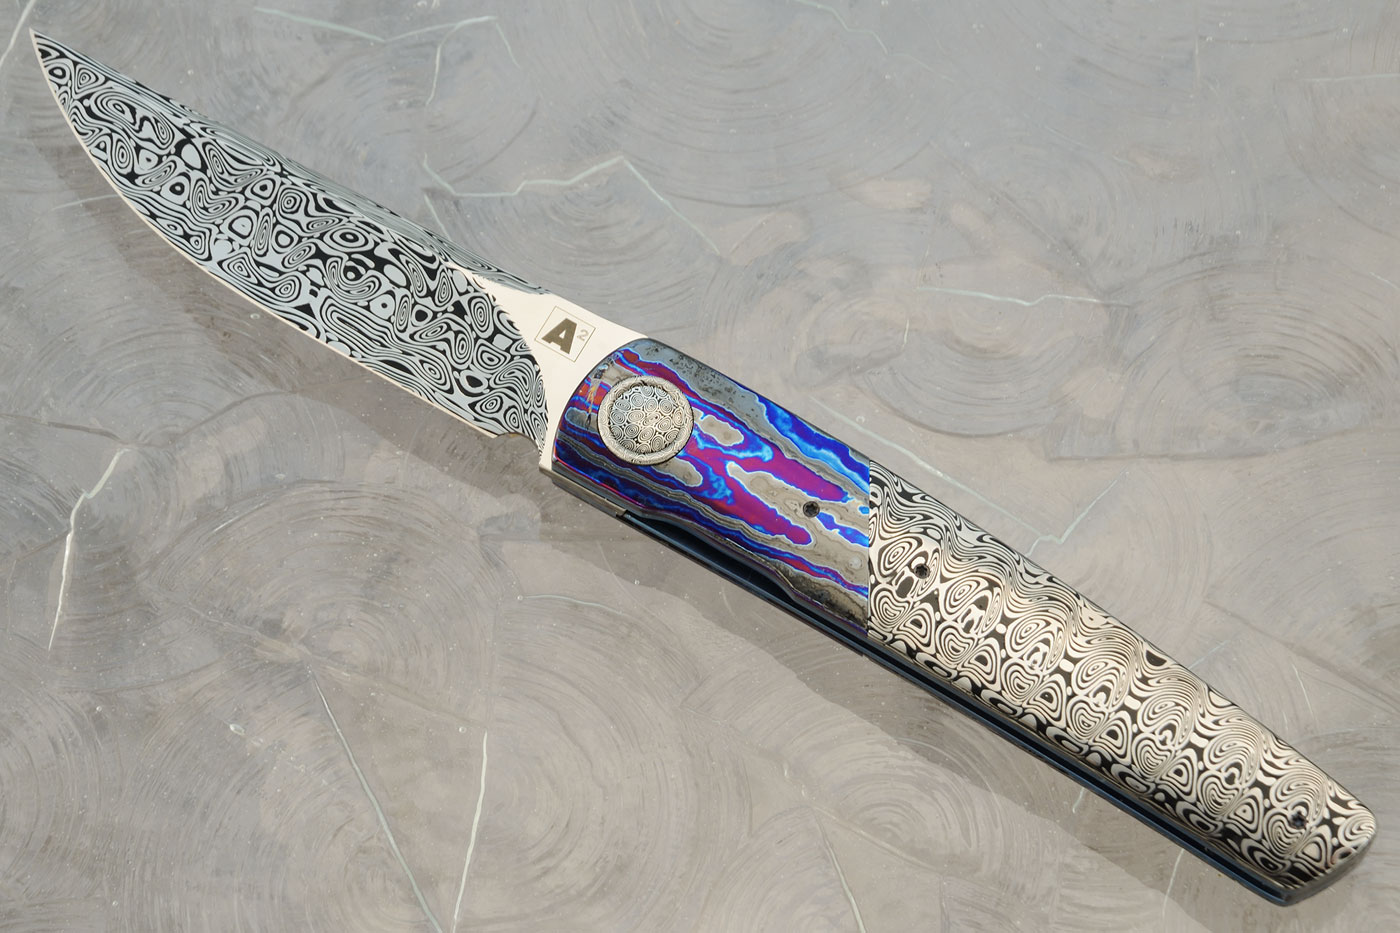 A10 Dress Front Flipper with Damasteel and Black Timascus (Ceramic IKBS)